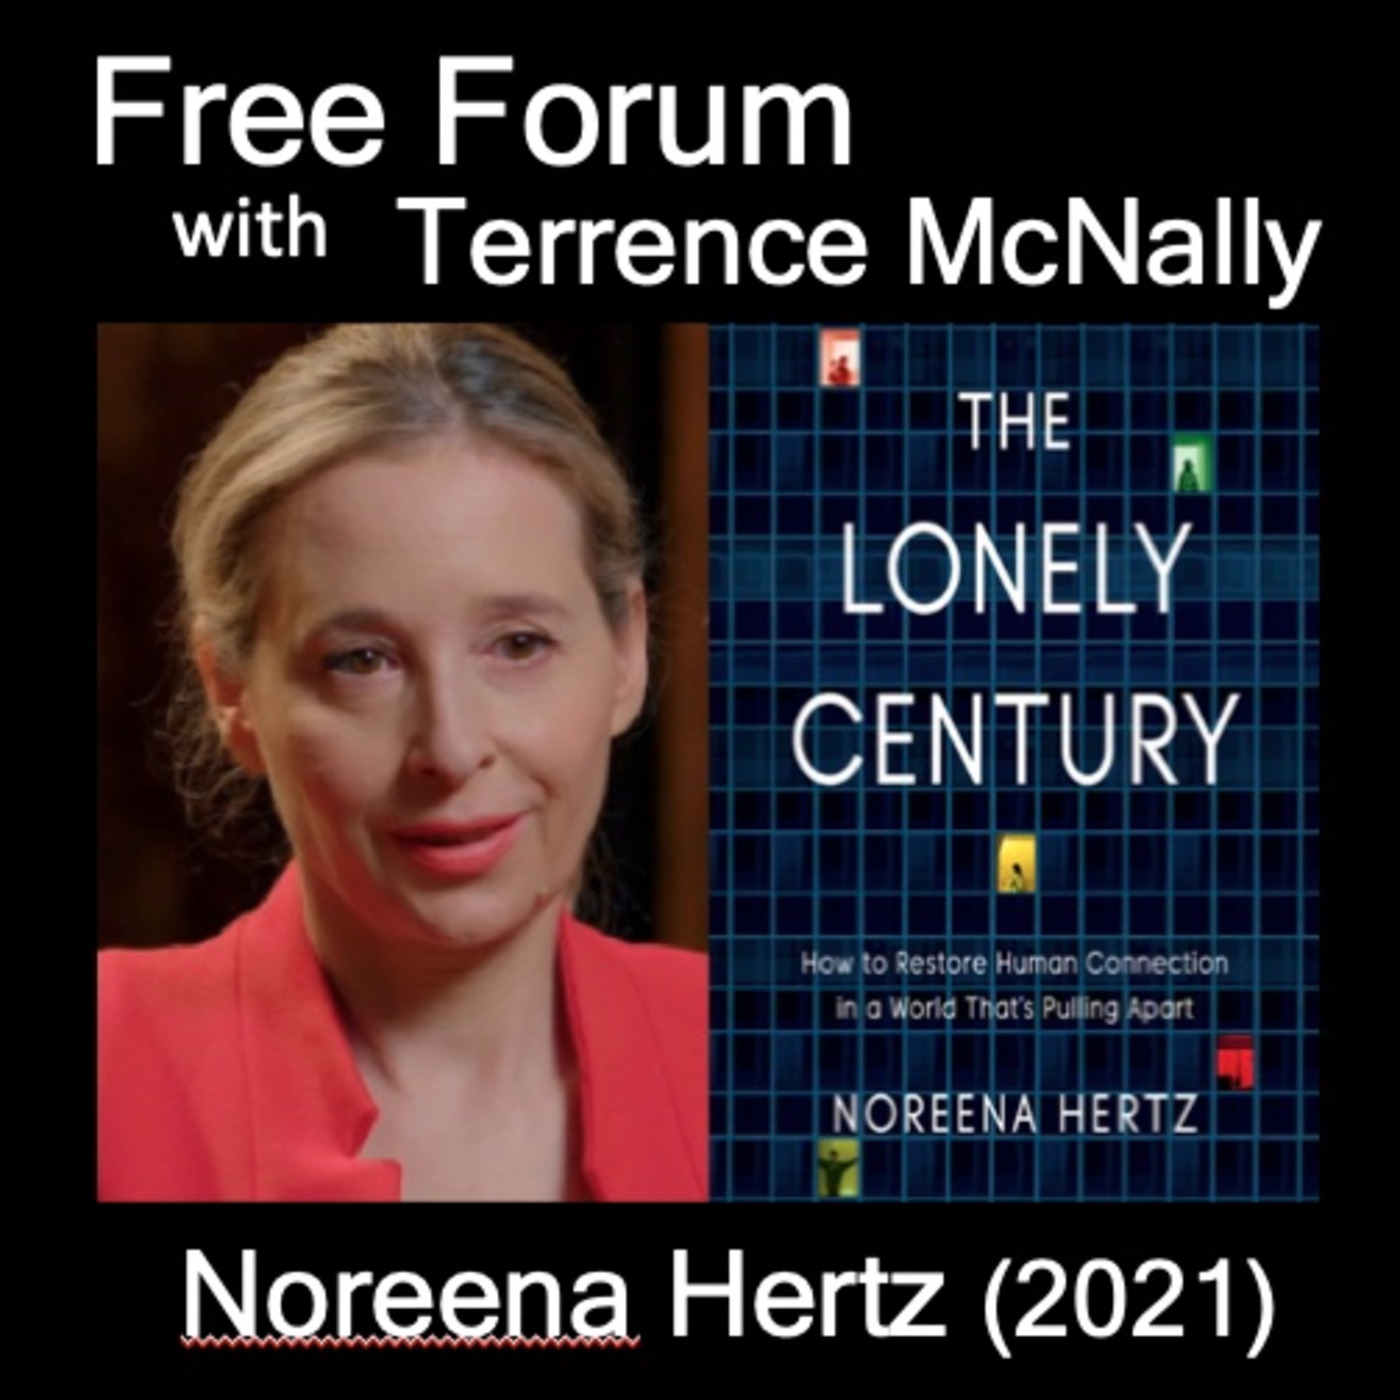 Episode 599: NOREENA HERTZ (2021) -THE LONELY CENTURY - How do we restore human connection?